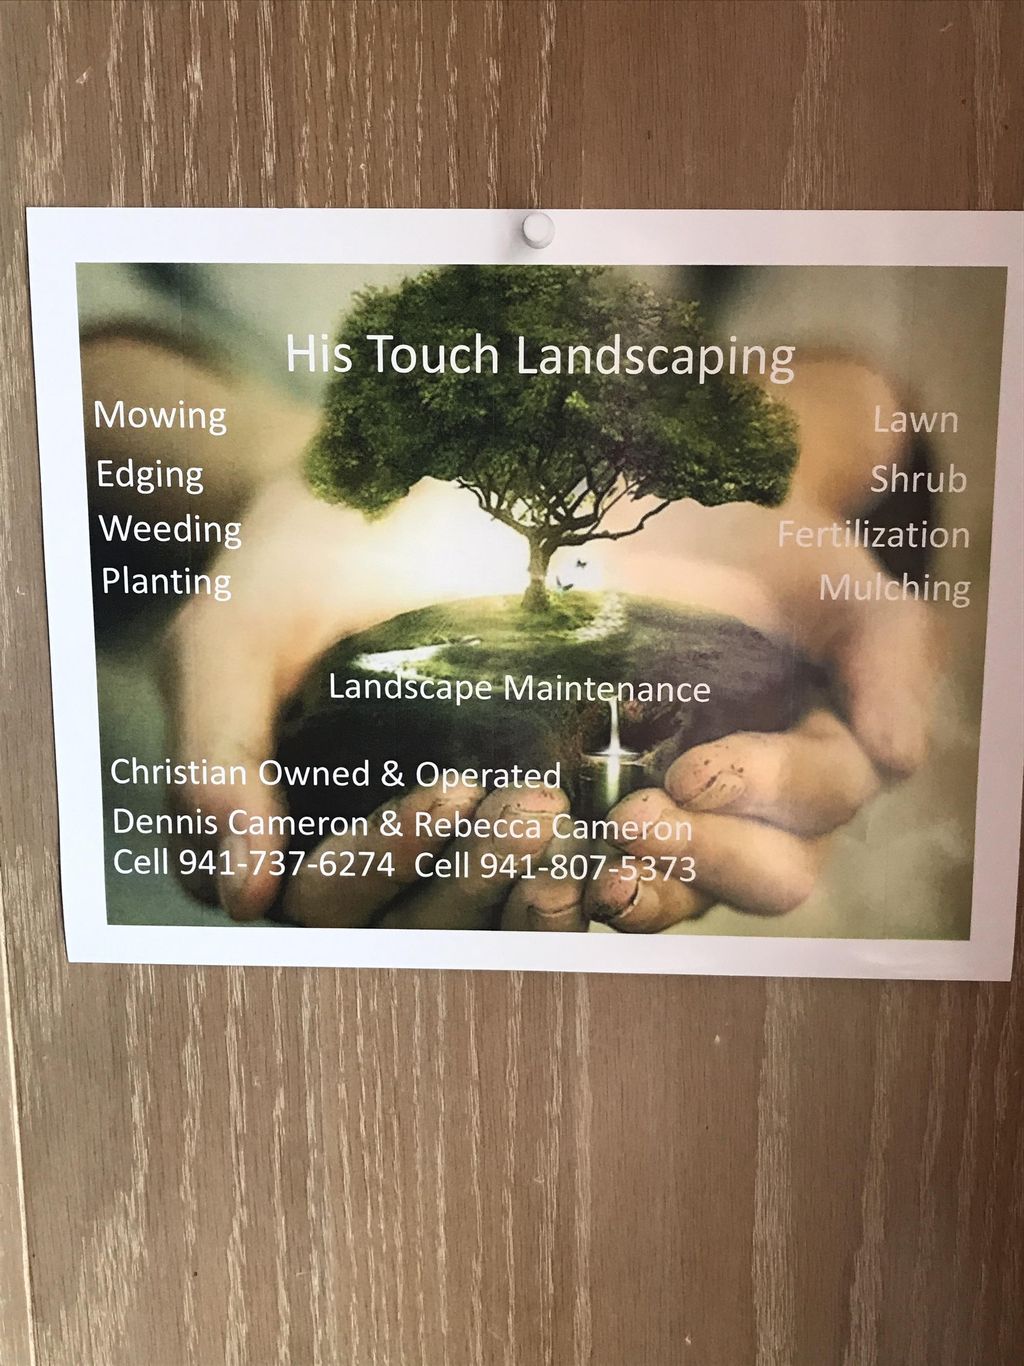 HisTouchLandscaping & Pest Control